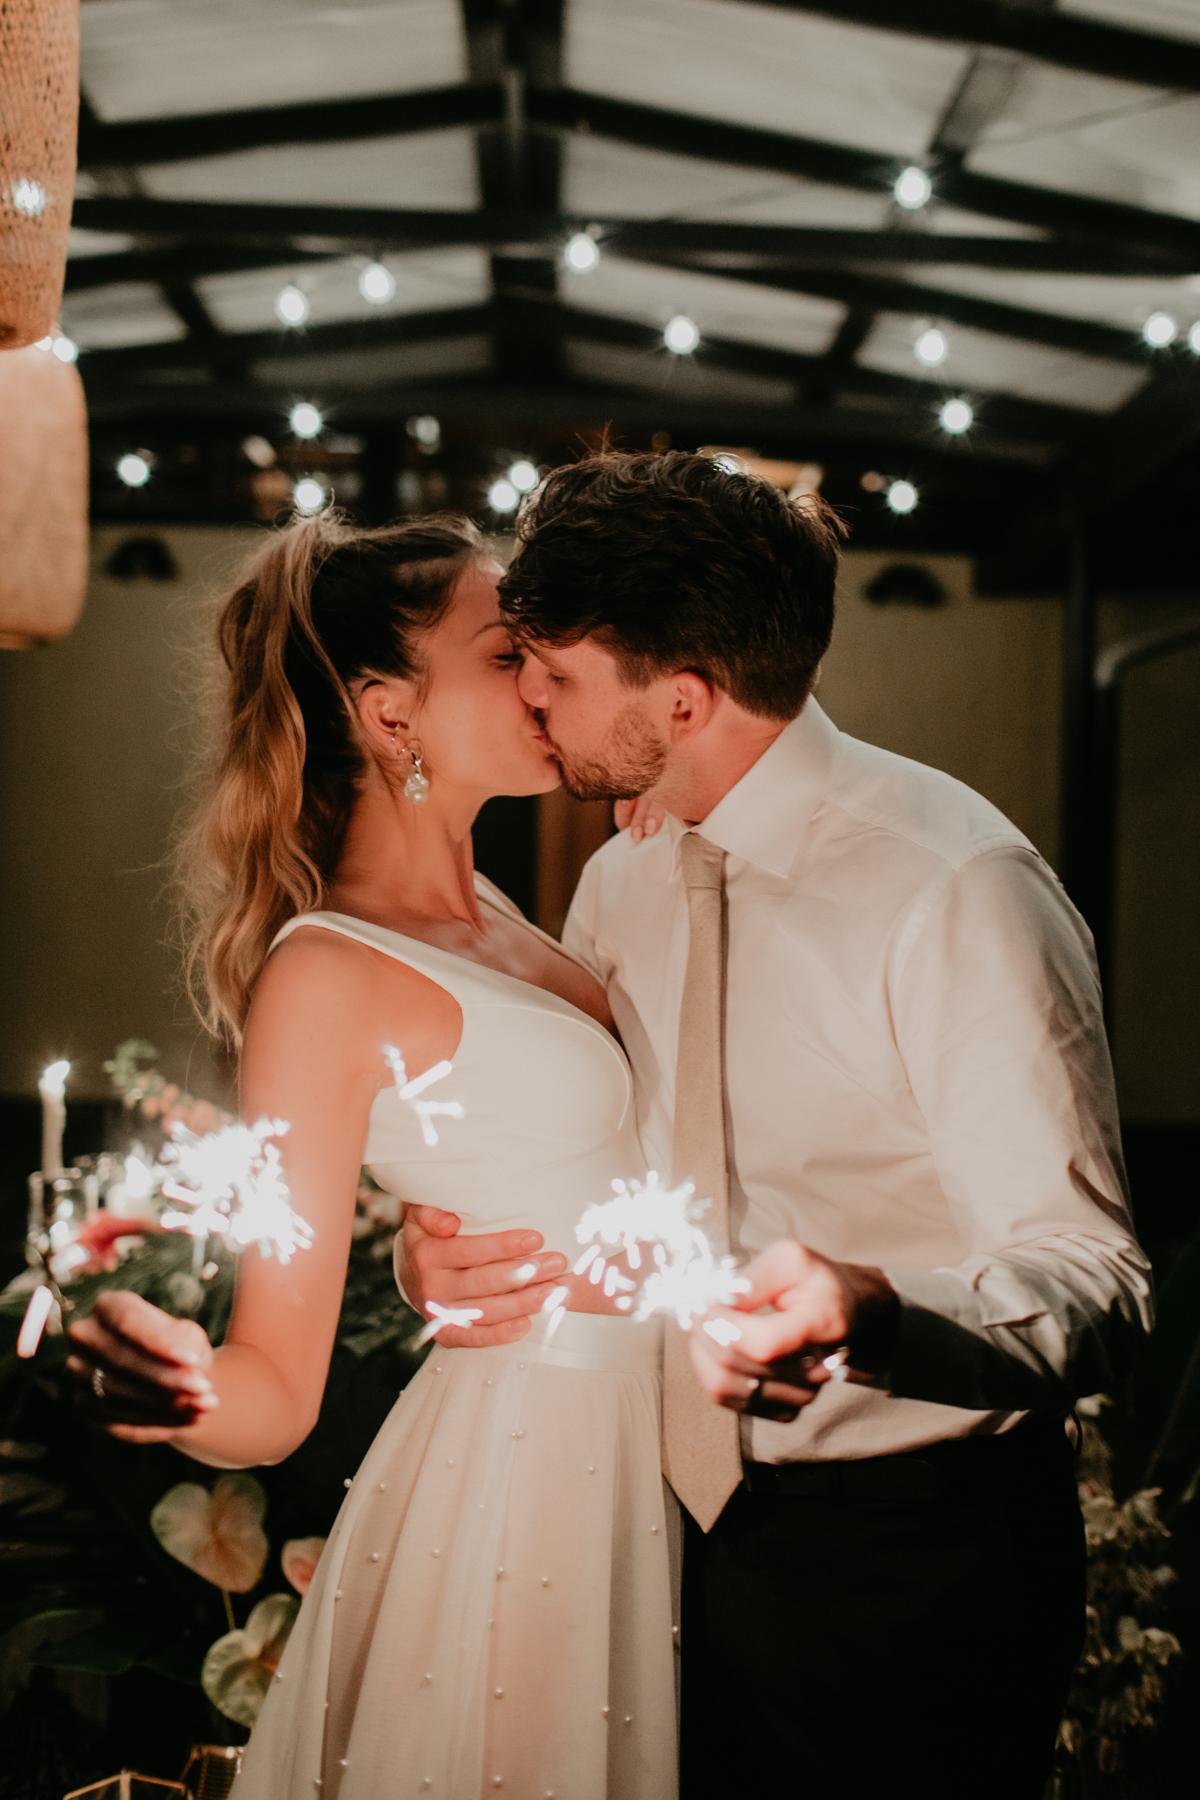 KWH real bride Jana sharing a kiss with her new husband Garret by the glow of their sparklers. She wears the effortless Erin and Lea wedding dress combo.